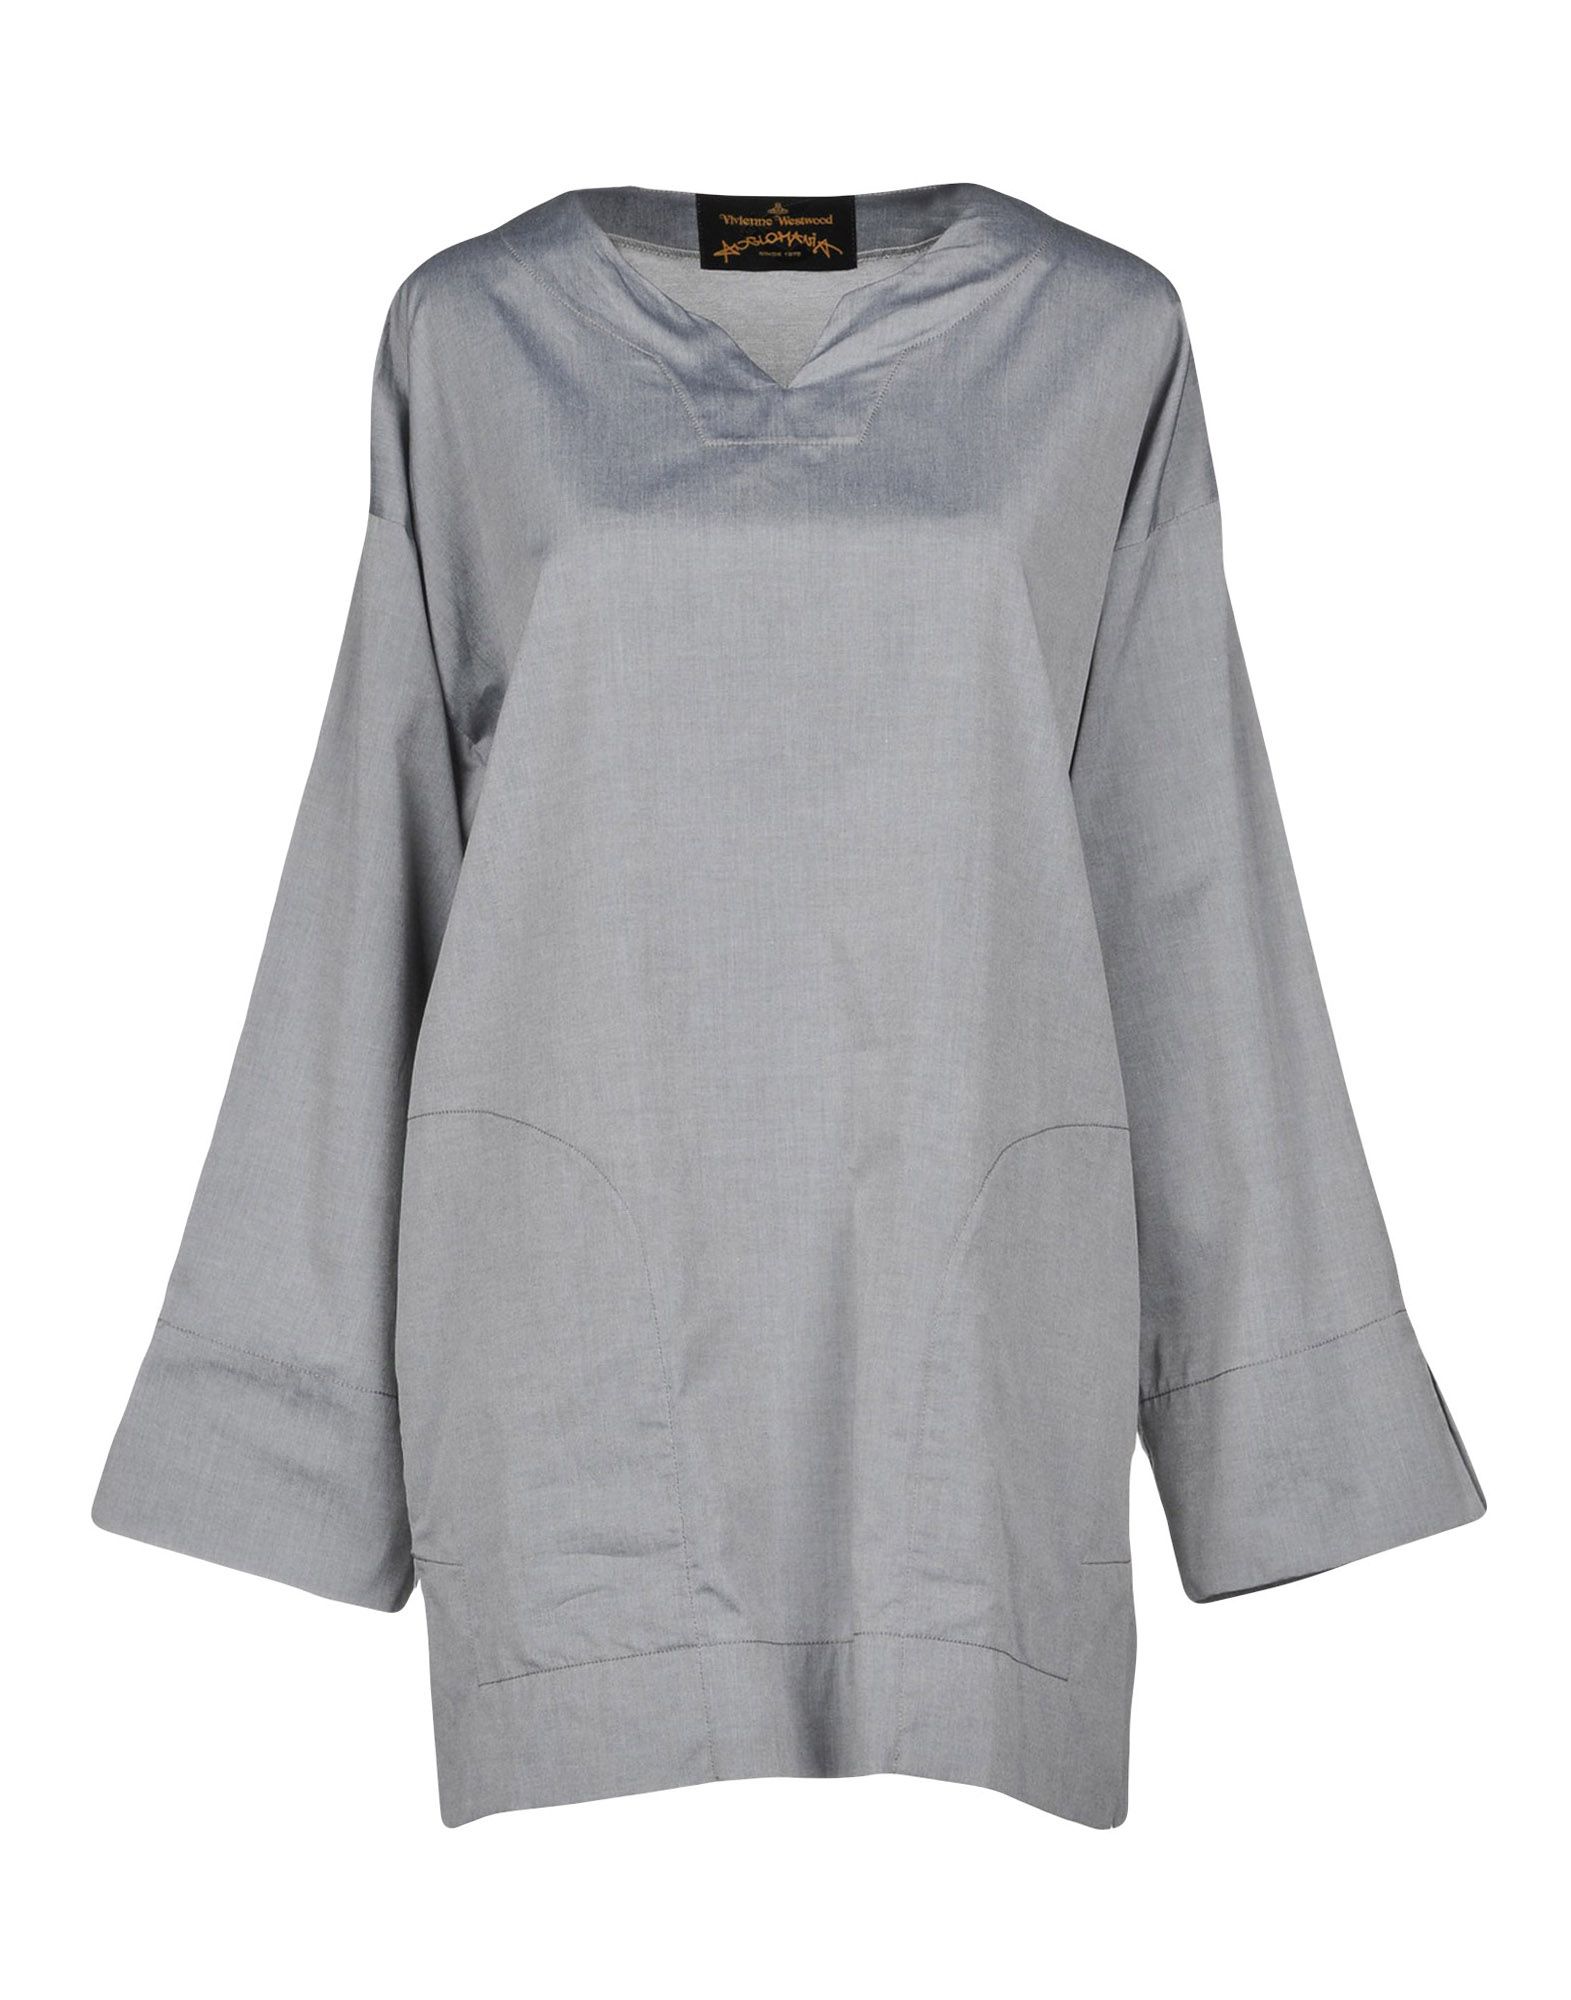 VIVIENNE WESTWOOD ANGLOMANIA VIVIENNE WESTWOOD ANGLOMANIA WOMAN TOP GREY SIZE 4 COTTON,38761321PK 3